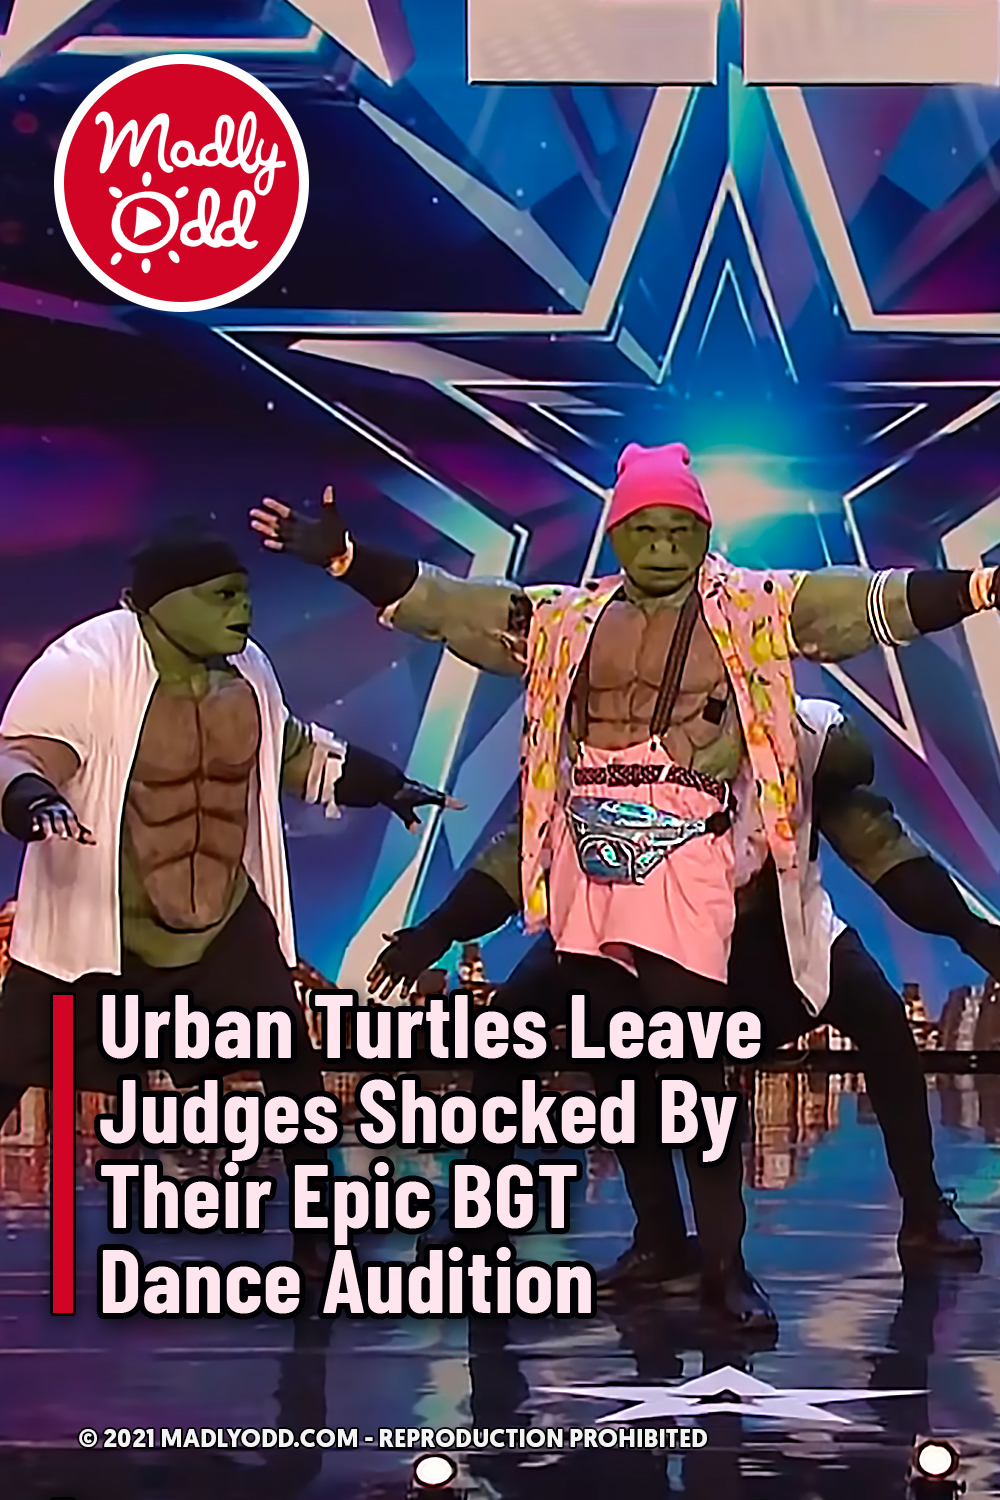 Urban Turtles Leave Judges Shocked By Their Epic BGT Dance Audition